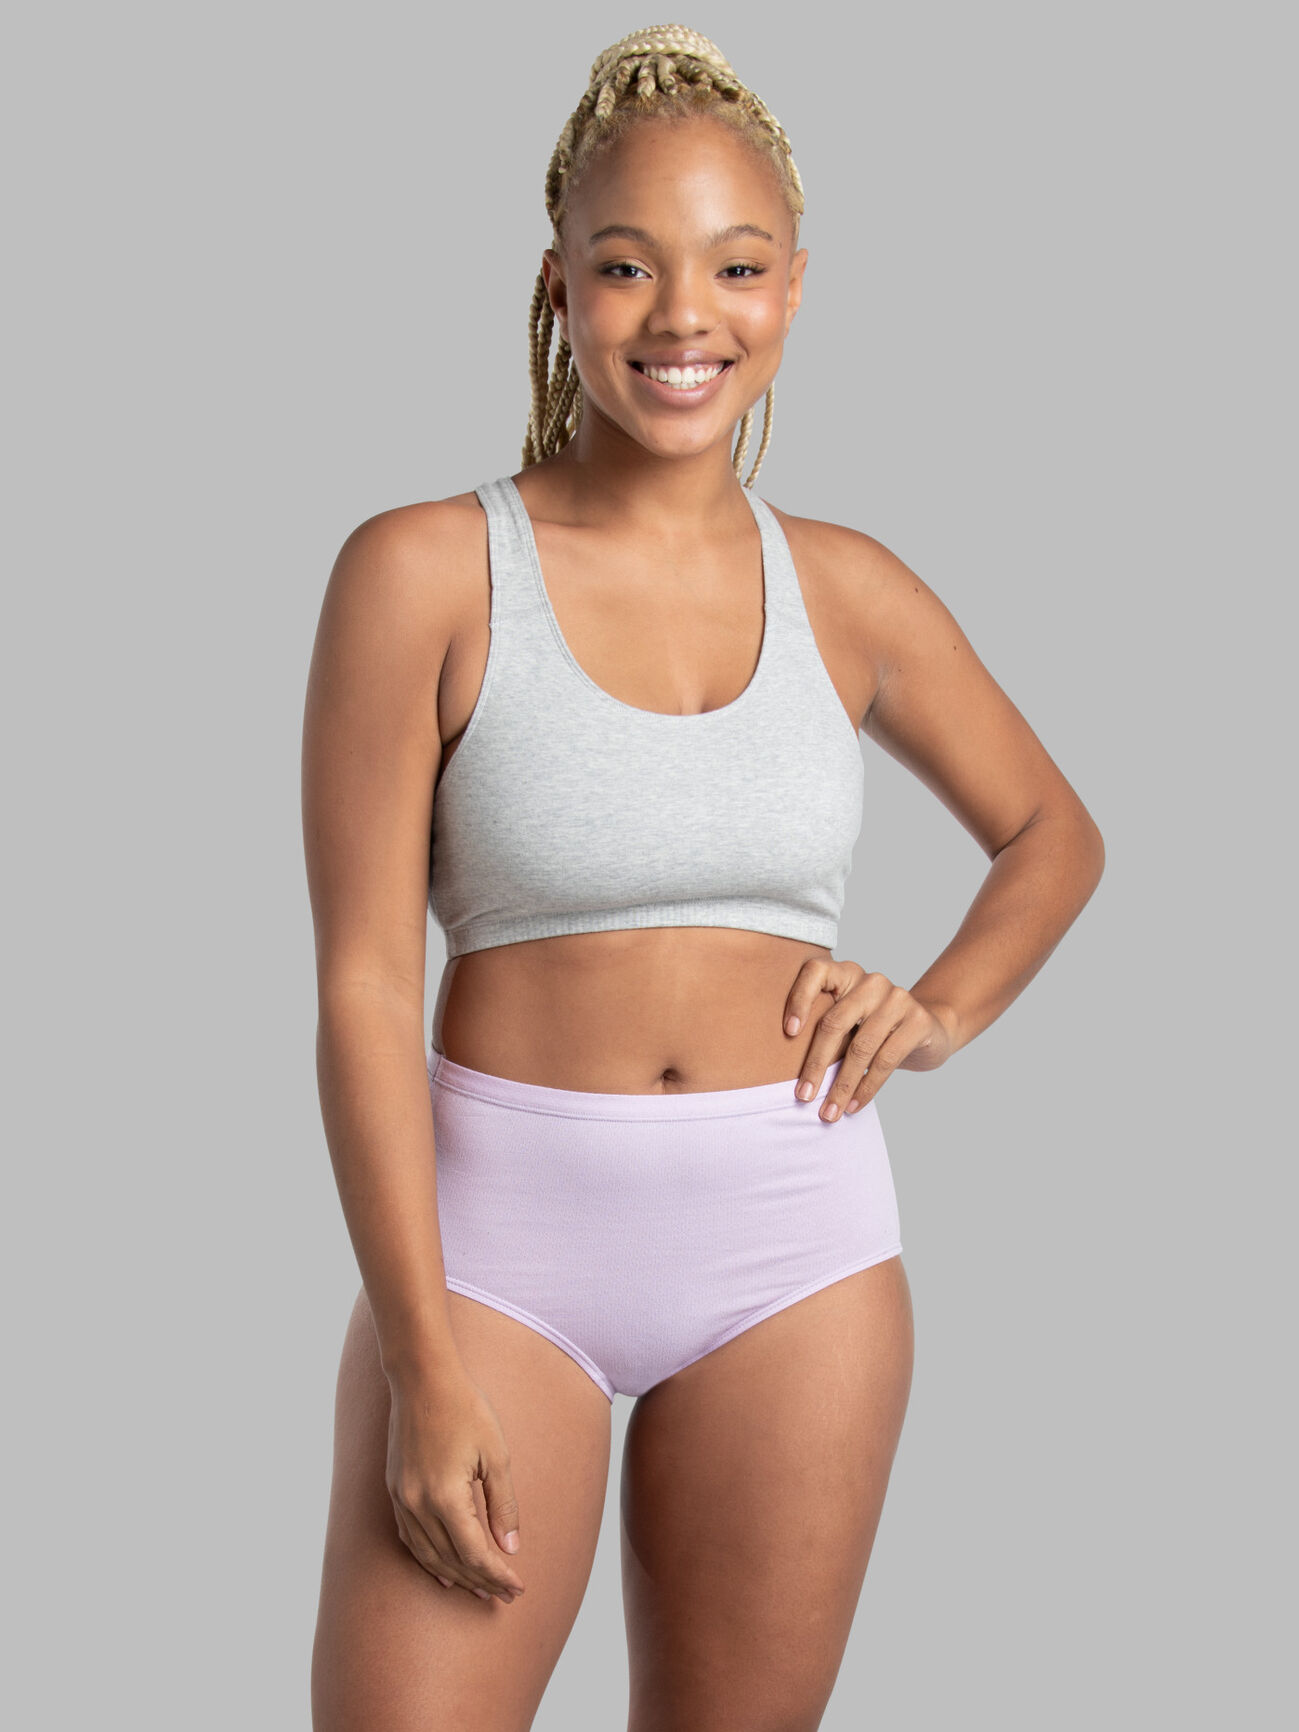 Women Stay Dry Period Panty - Cotton Spandex - Full Coverage, Mid Rise,  High Absorbance, No Marks Waistband